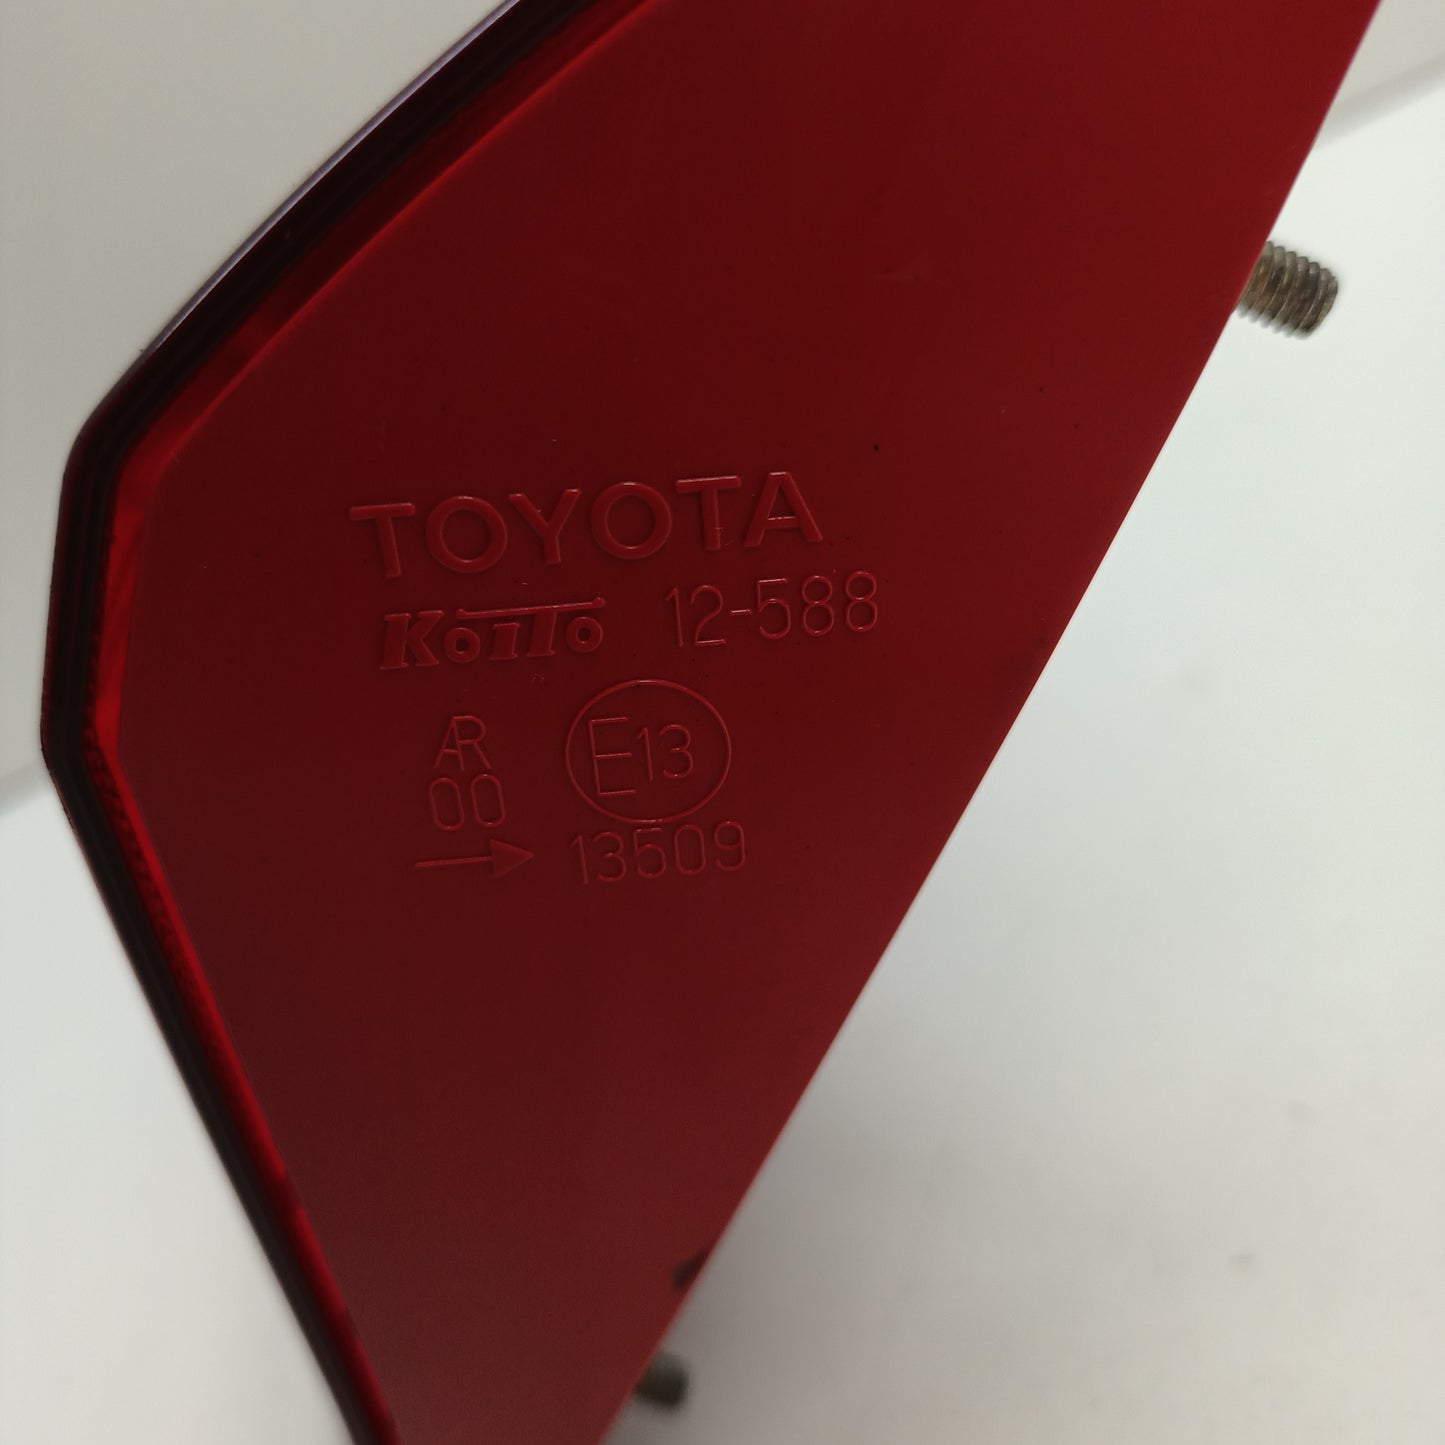 Toyota Corolla Hatchback Tailgate Lamp Right Side ZRE182R 2012 2013 2014 2015